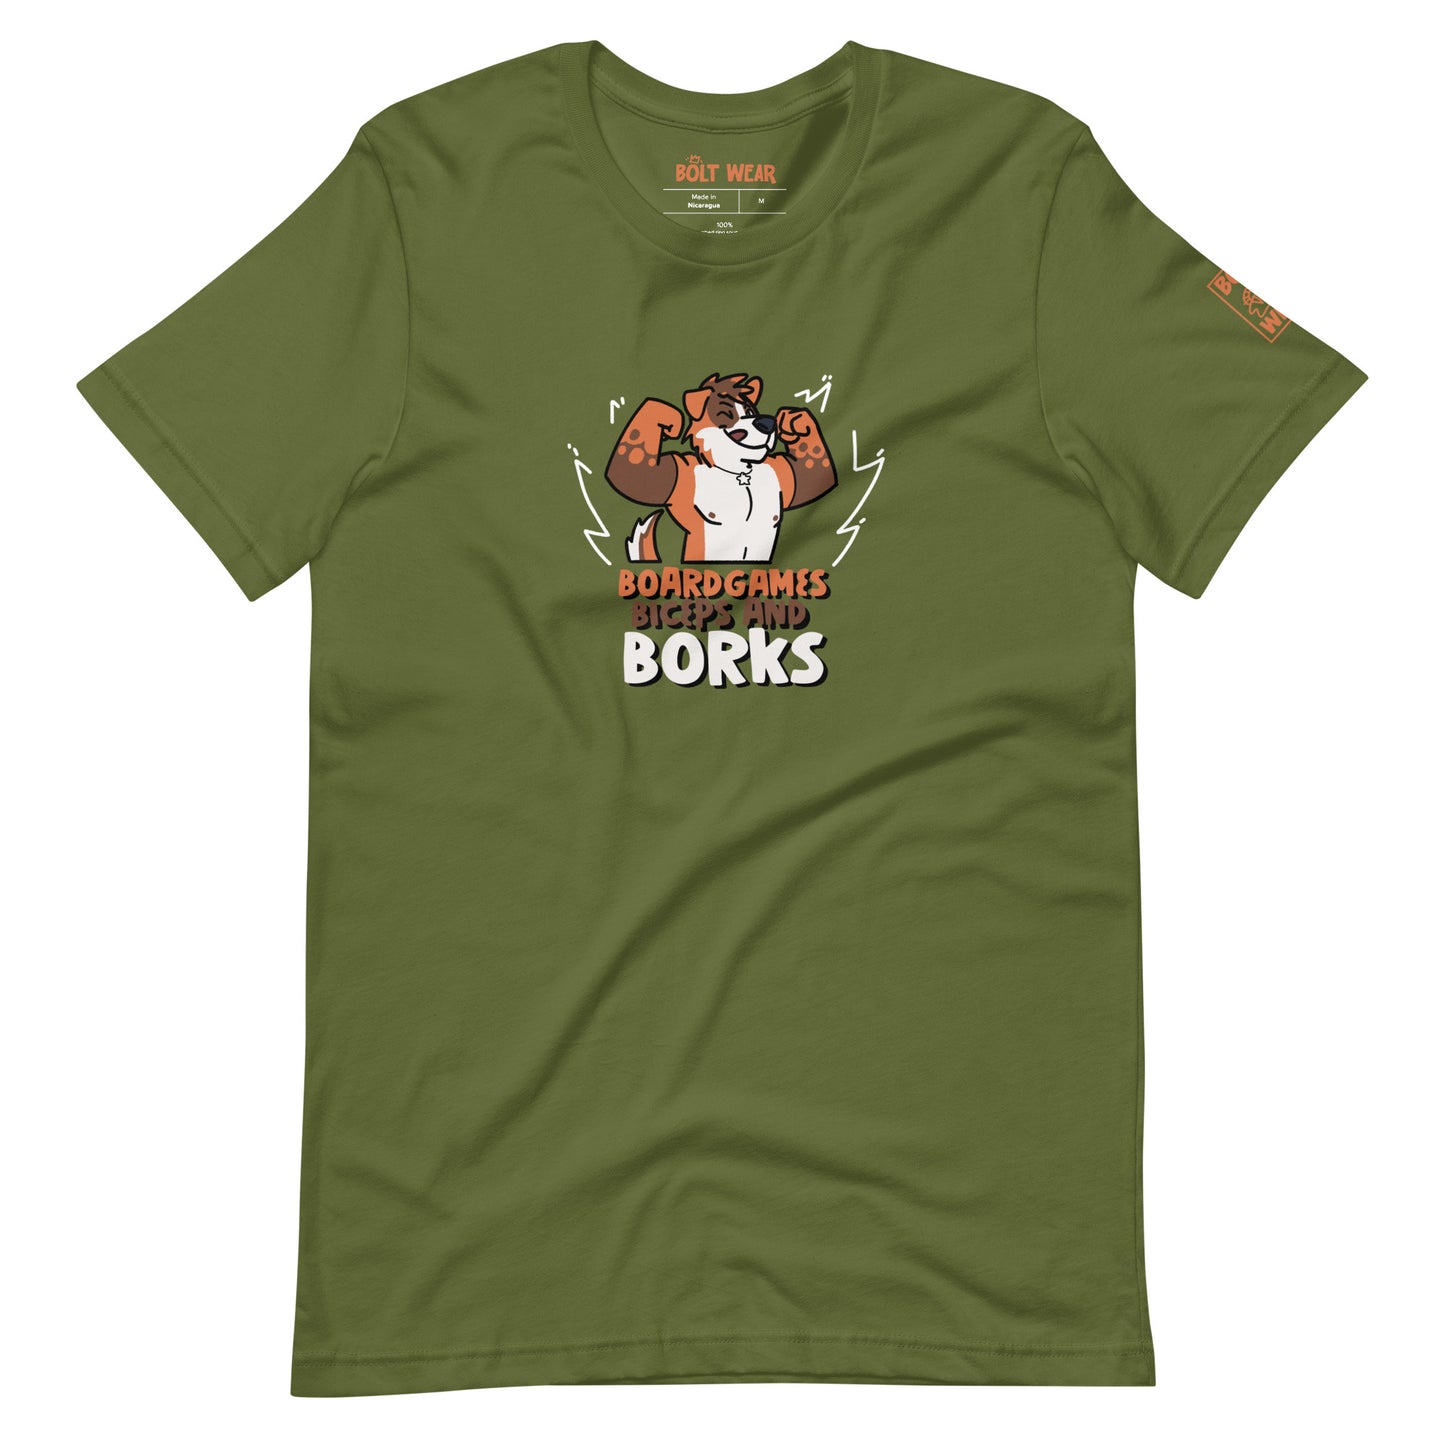 Olive t-shirt with orange and brown furry dog flexing with the text Board Games Biceps and Borks underneath them. Orange logo featured on sleeve